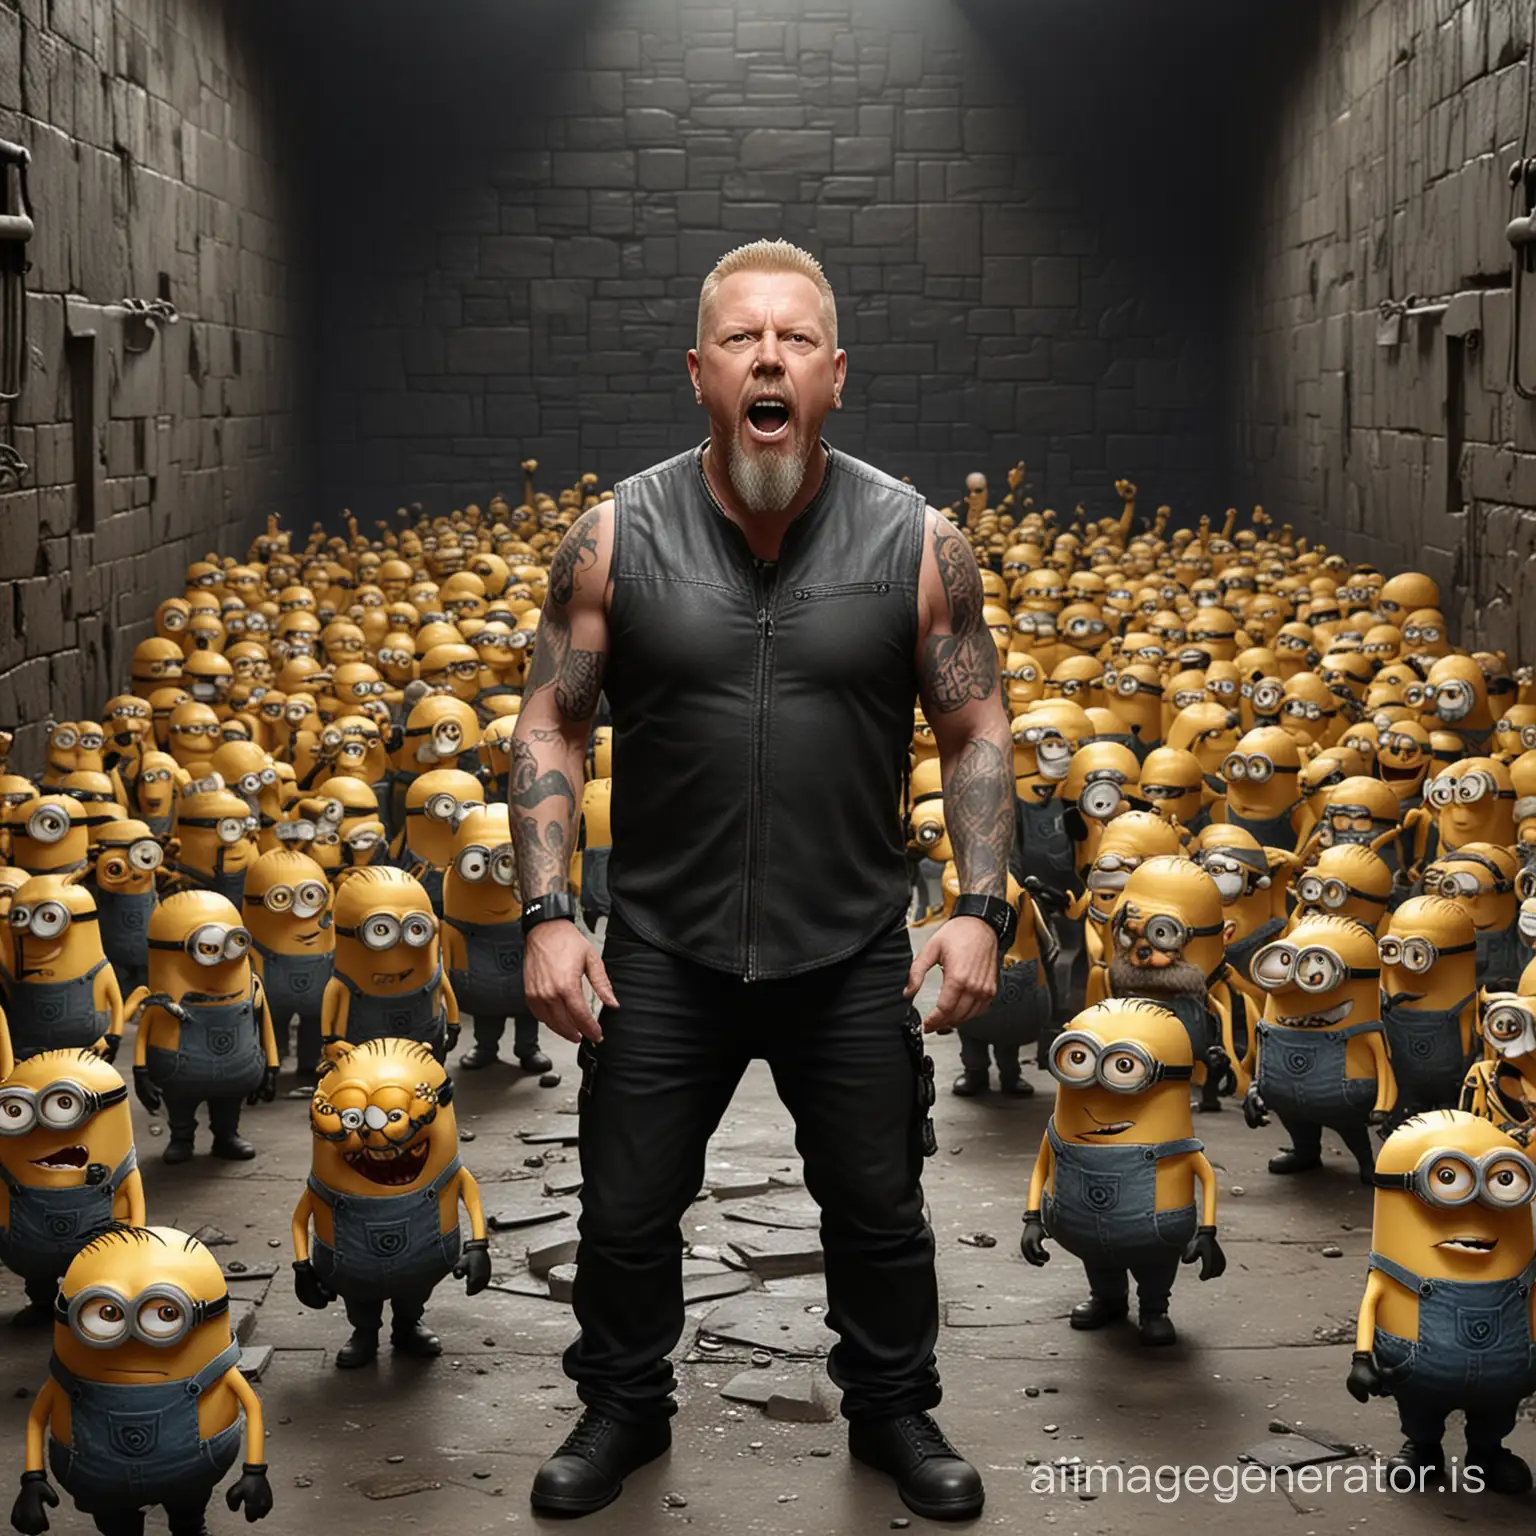 James-Hetfield-Bald-with-Beard-Surrounded-by-Minions-in-3D-Dungeon-Realism